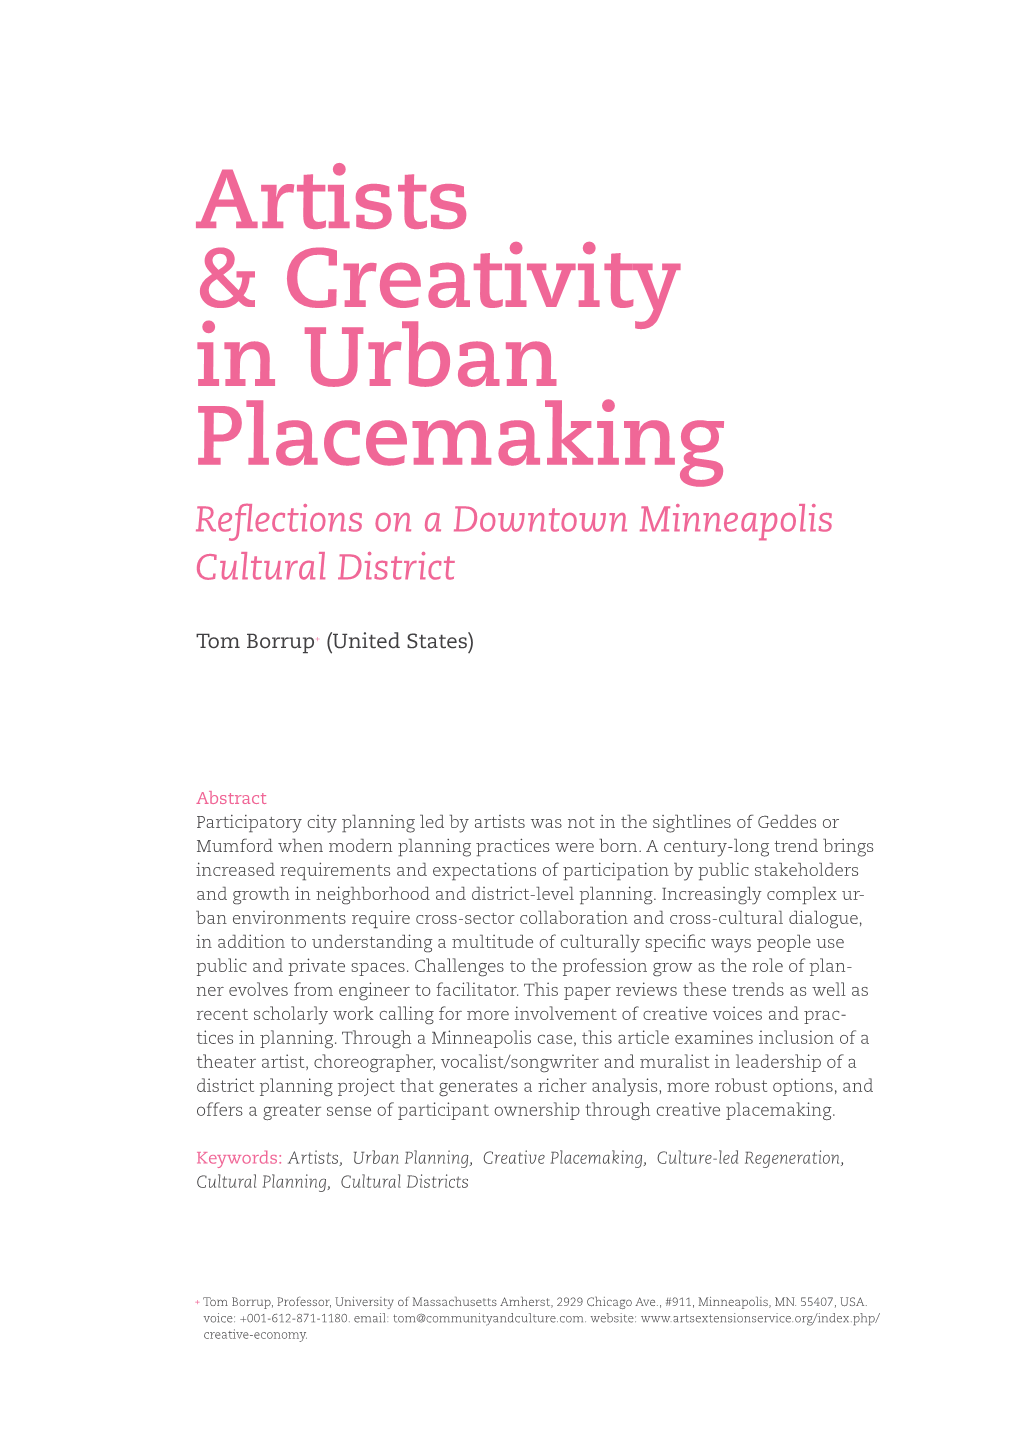 Artists & Creativity in Urban Placemaking